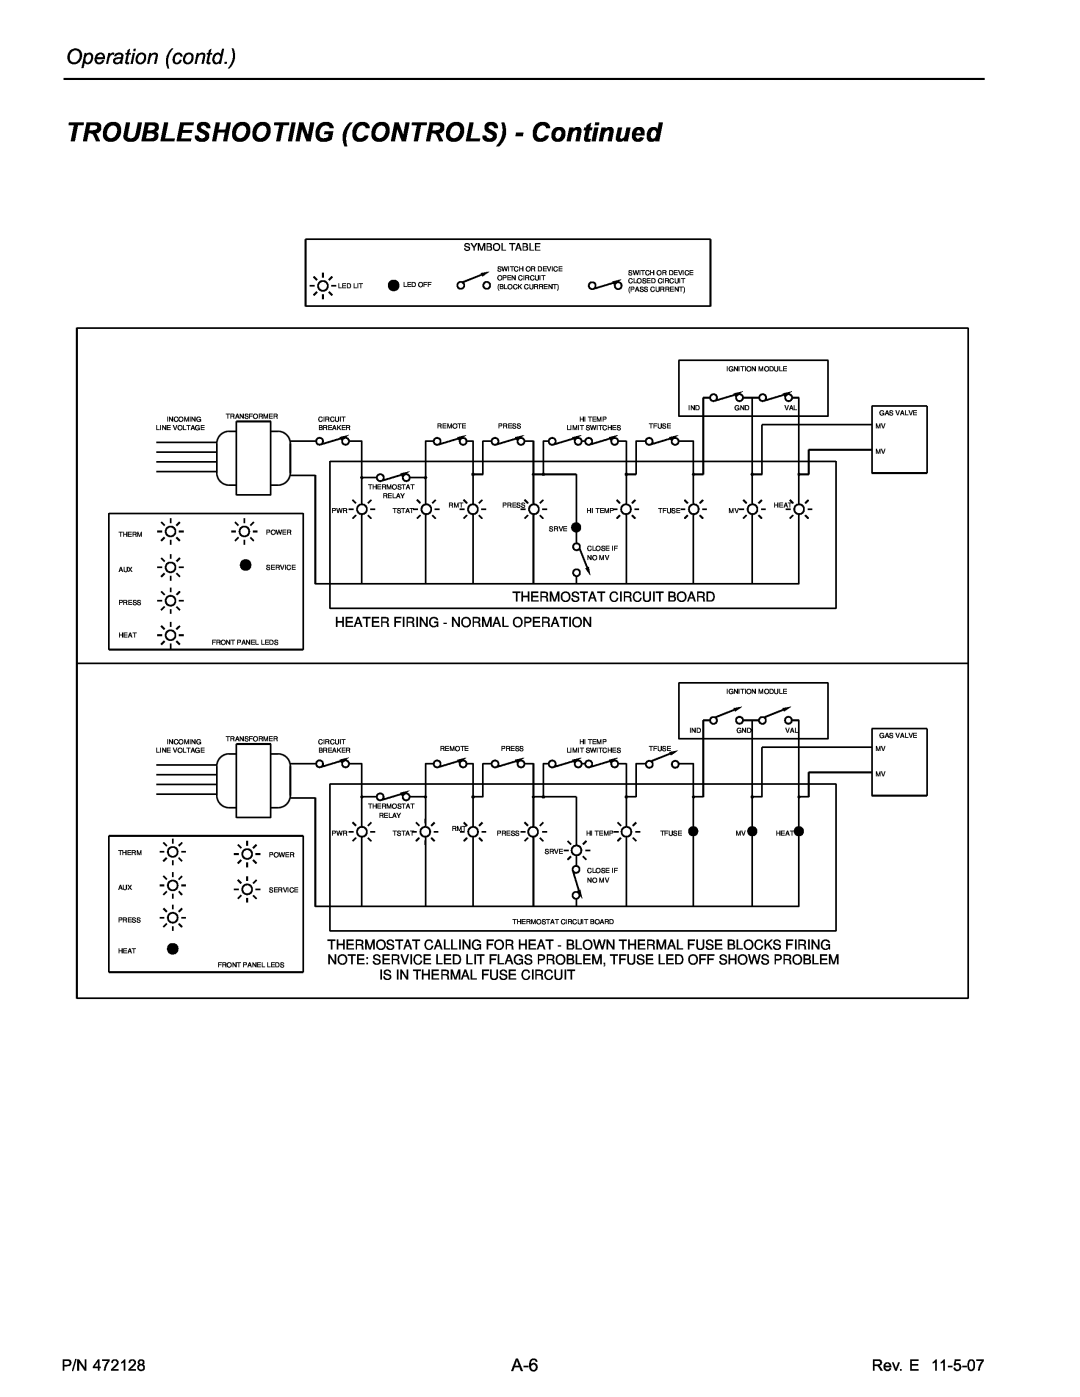 Pentair Hot Tub manual TROUBLESHOOTING CONTROLS - Continued, Operation contd, Rev. E, Is In Thermal Fuse Circuit 